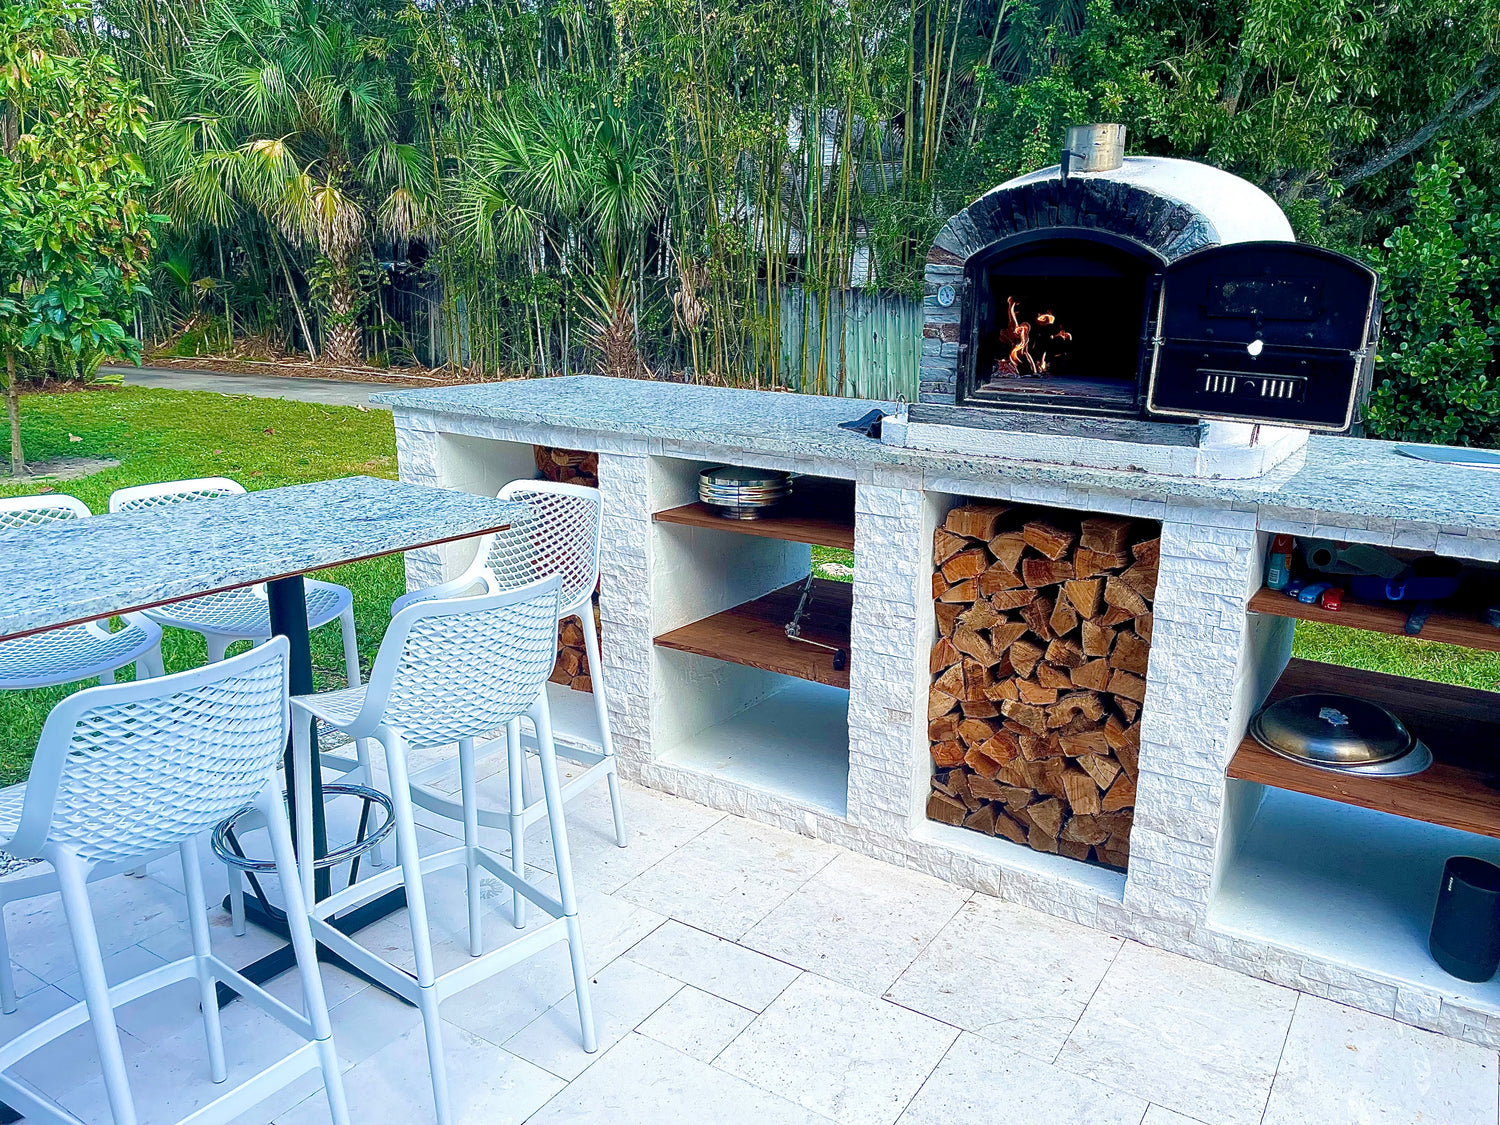 Backyard Kitchen with Pizza Oven